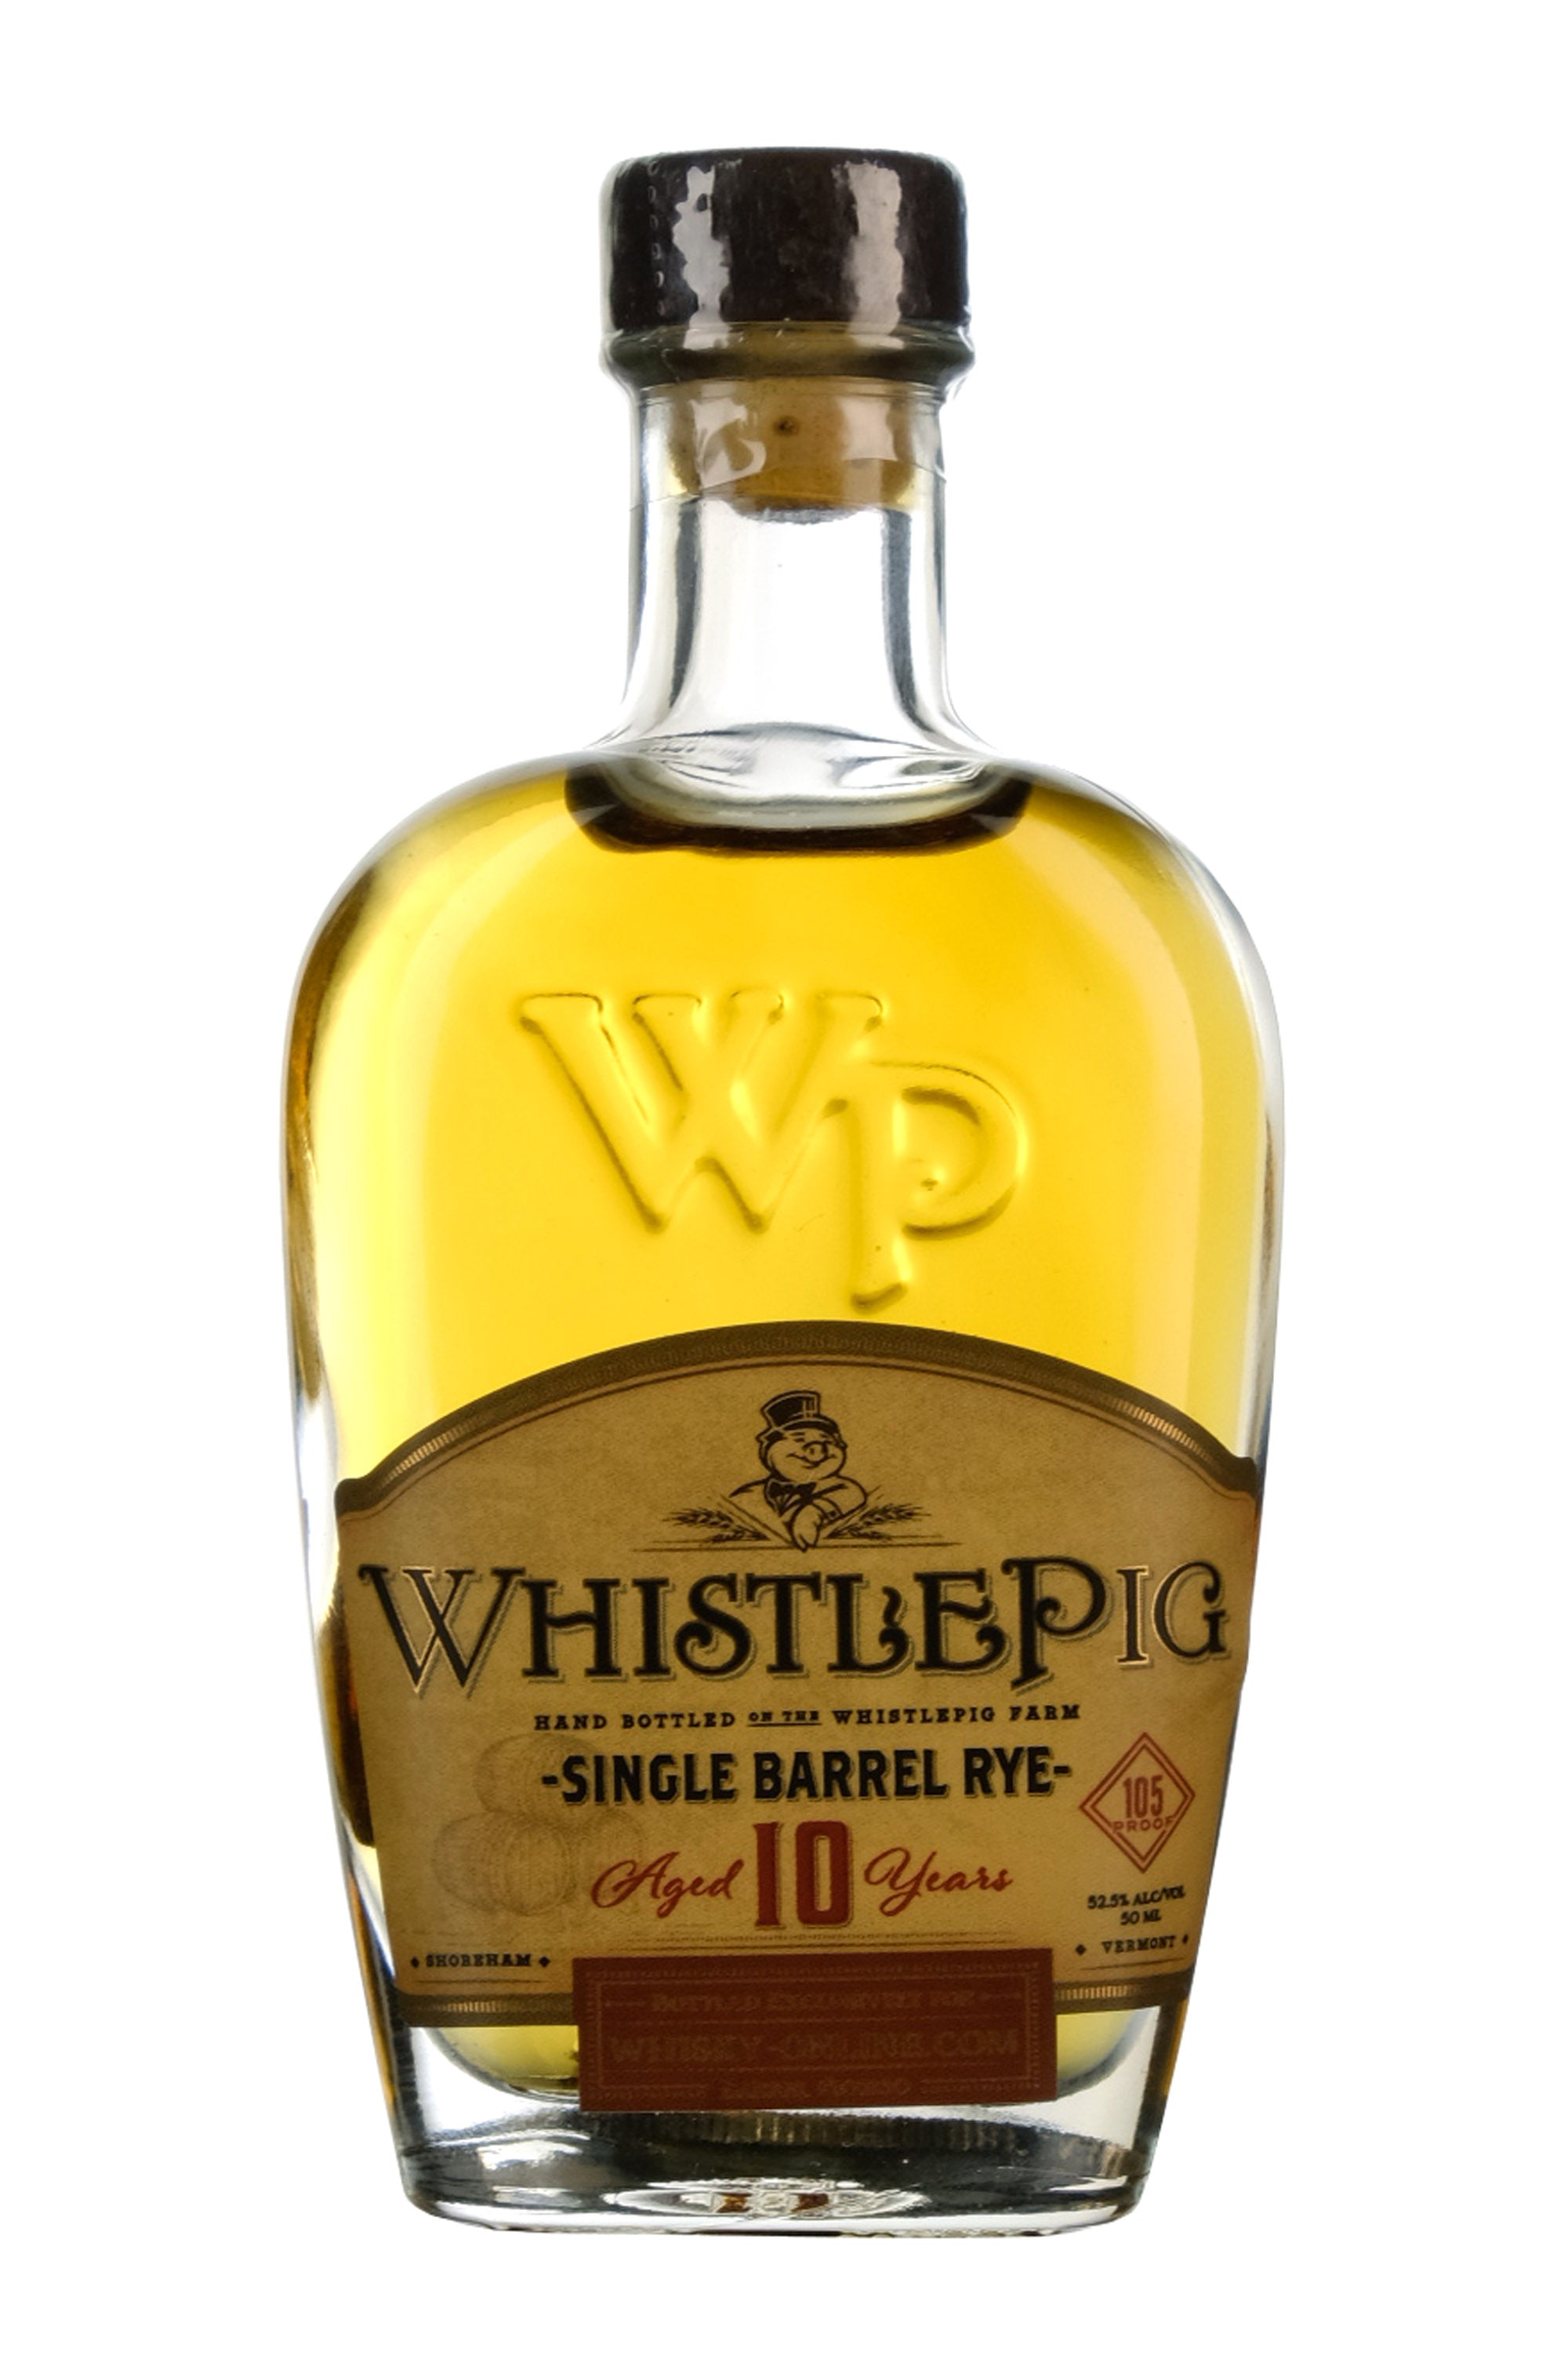 WhistlePig Rye Whiskey 10 Year Old | Barrel Pick 102130 | Whisky-Online Exclusive Miniature